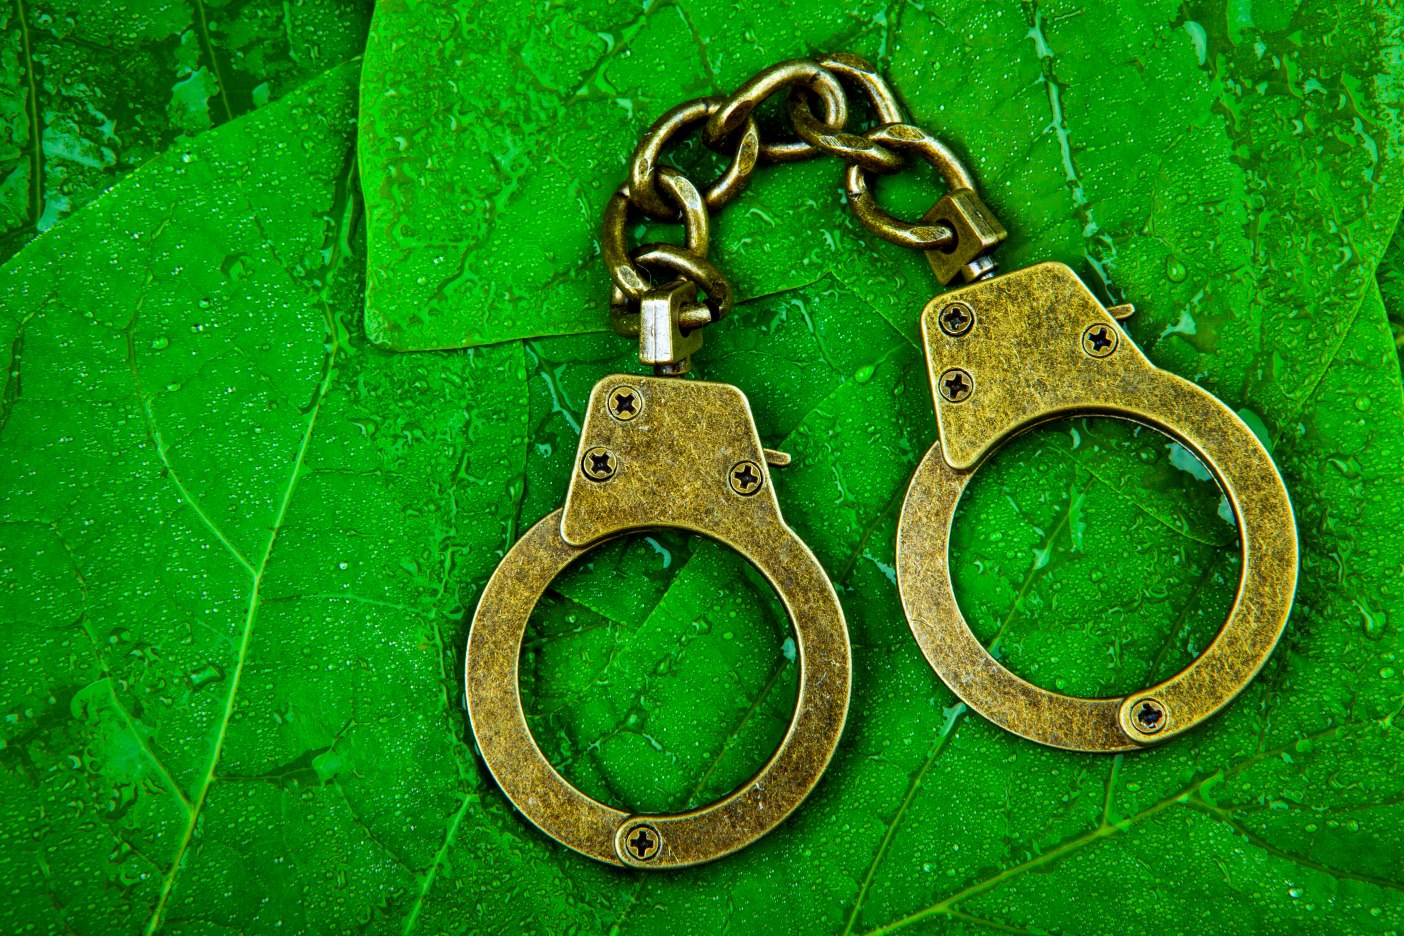 handcuffs on green leaves